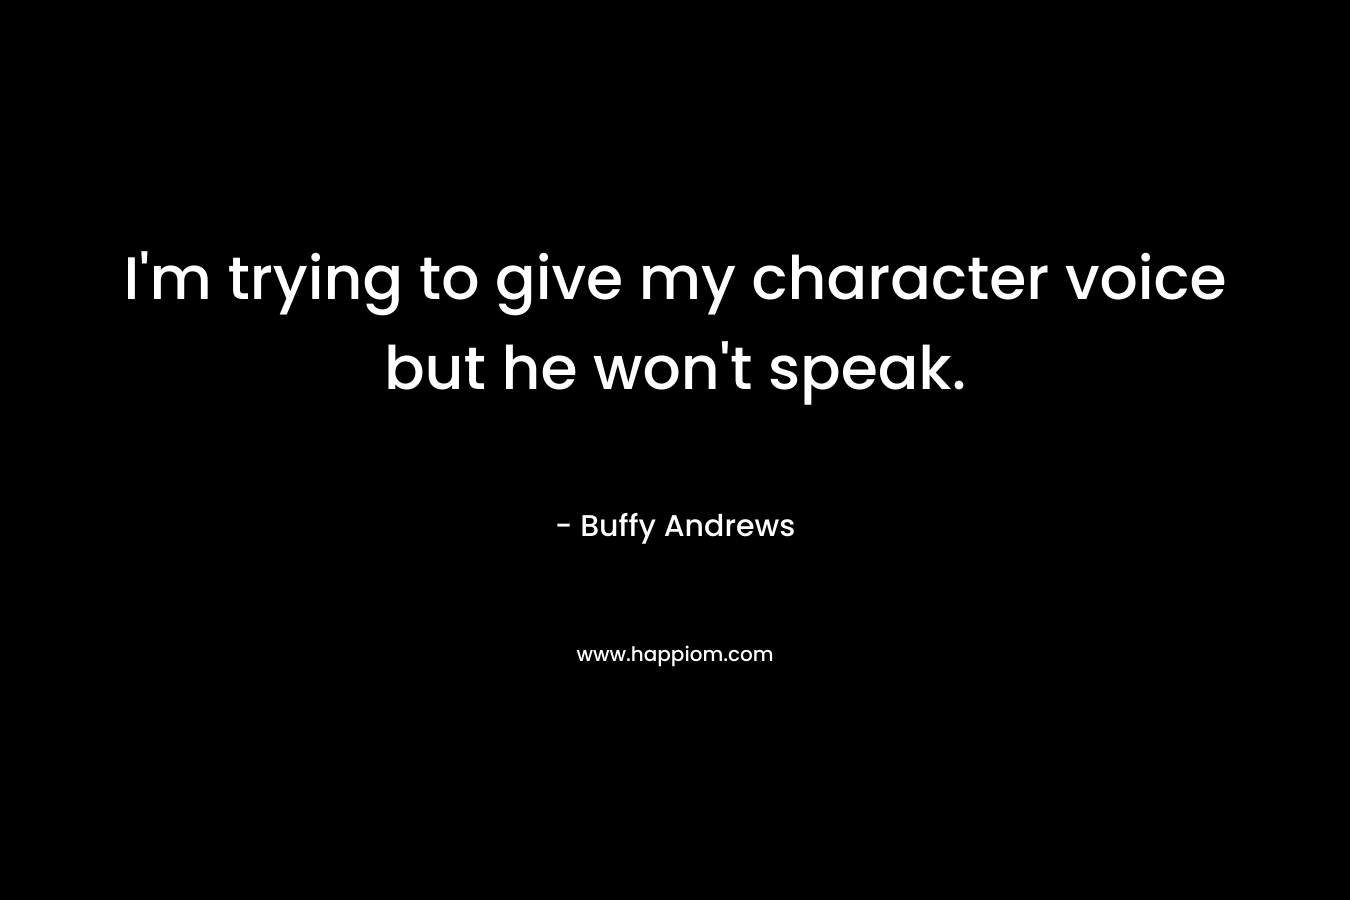 I’m trying to give my character voice but he won’t speak. – Buffy Andrews